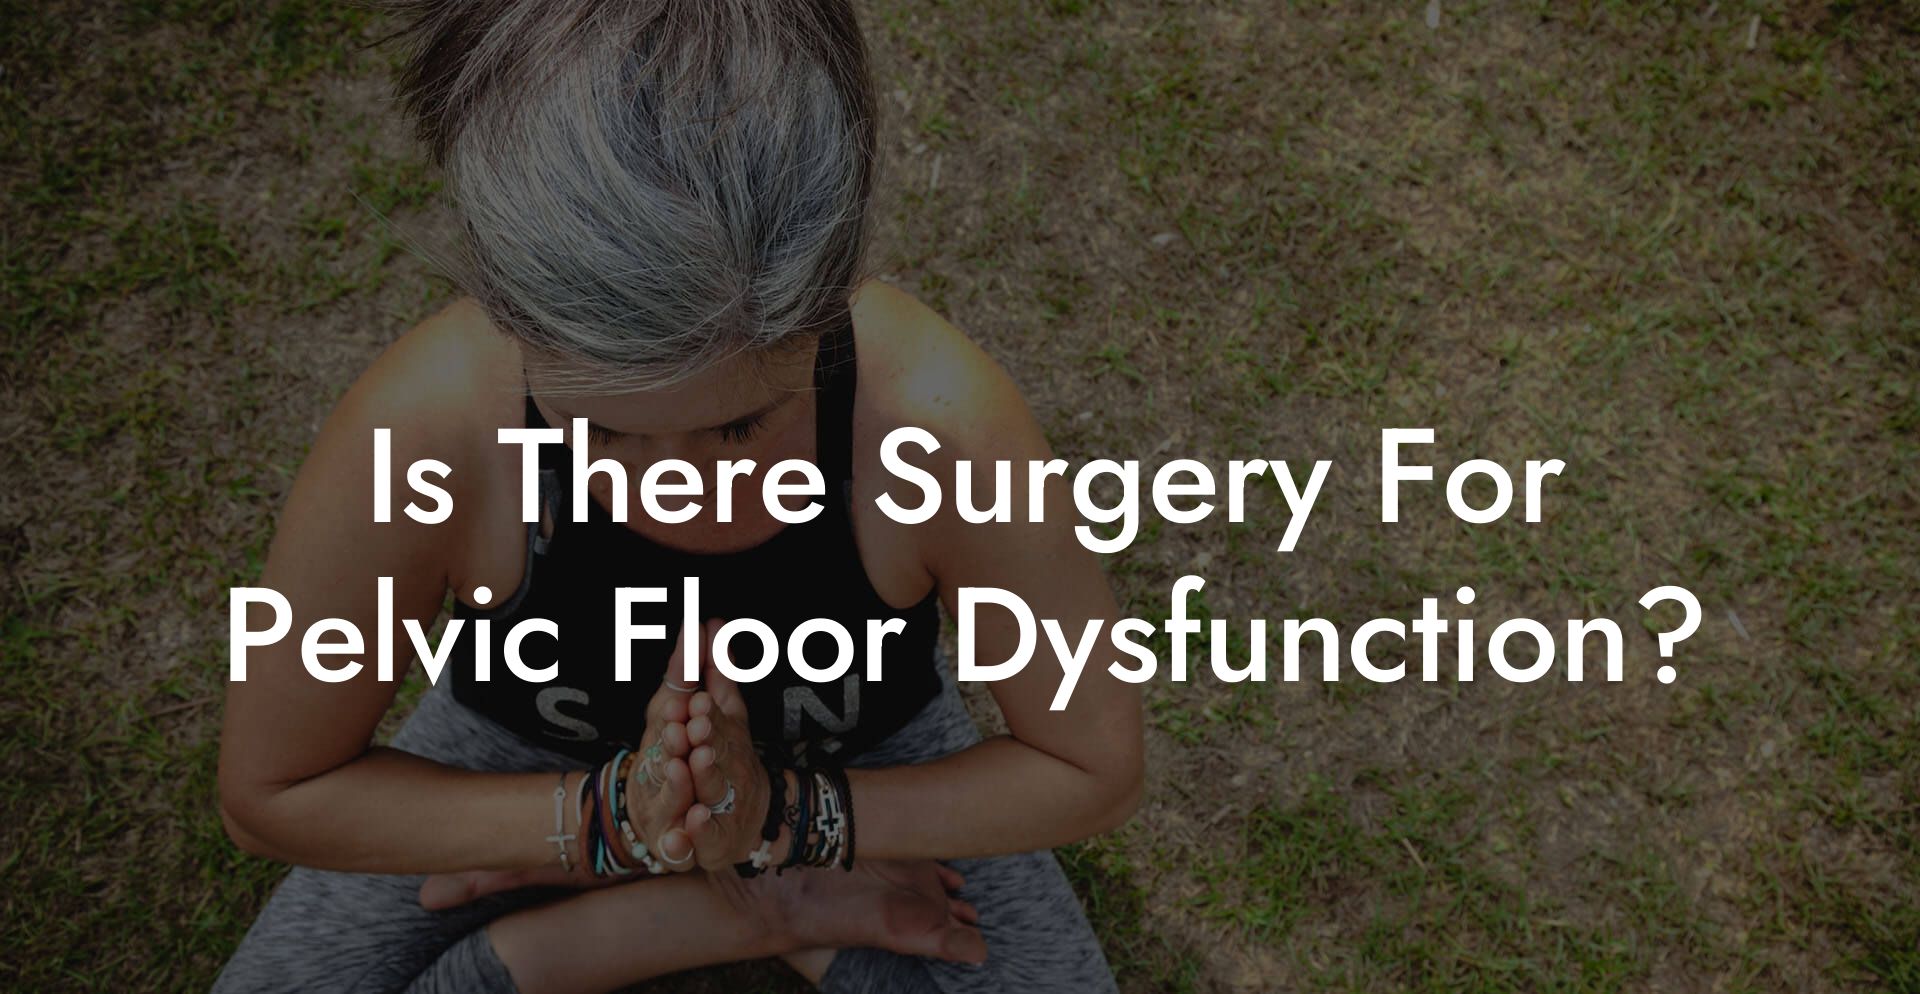 Is There Surgery For Pelvic Floor Dysfunction?